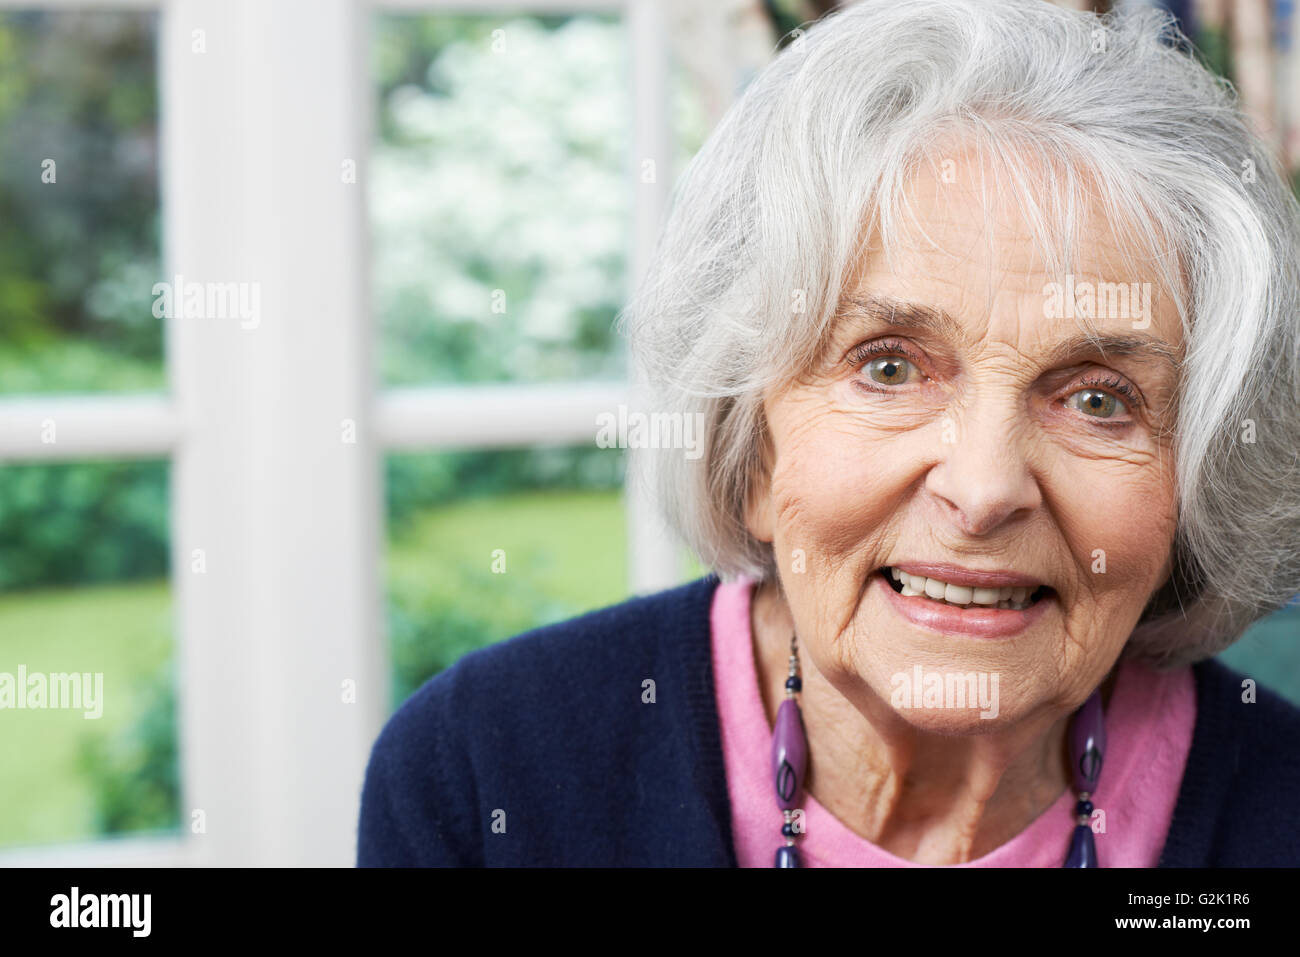 Head and shoulders Portrait Of Smiling Senior Woman at Home Banque D'Images